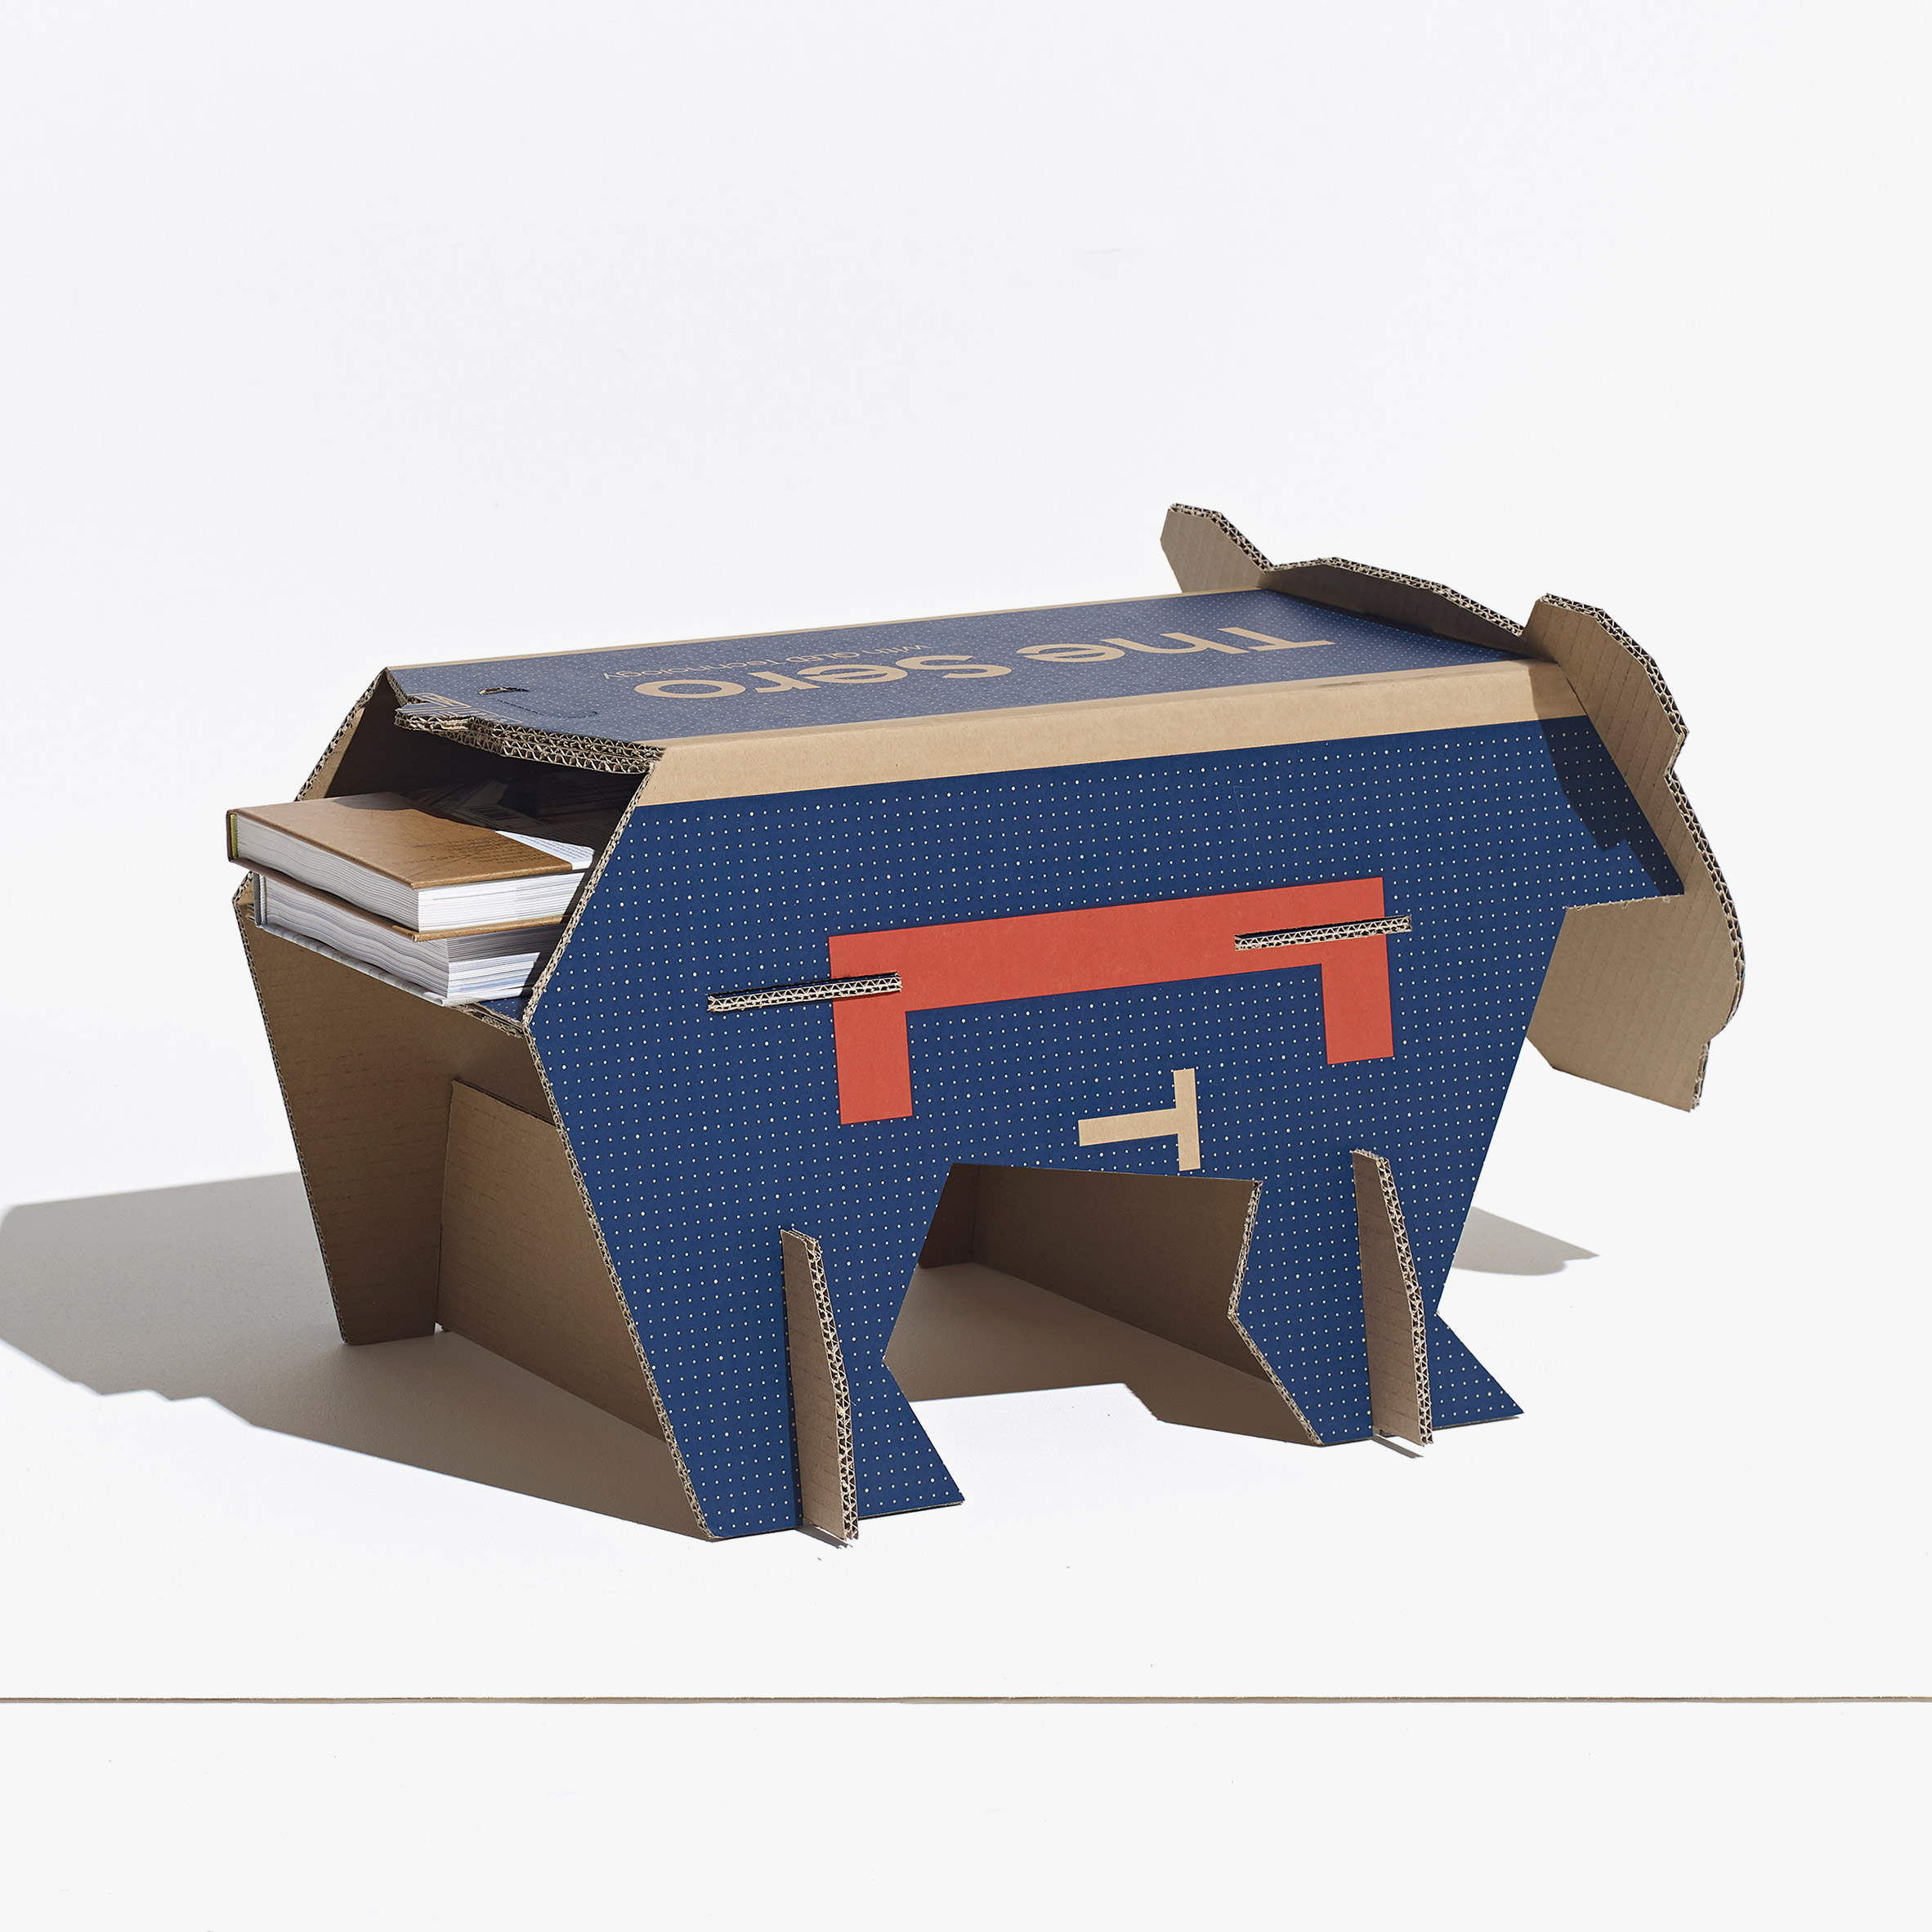 Polar bear toy made from repurposed Samsung TV cardboard boxes